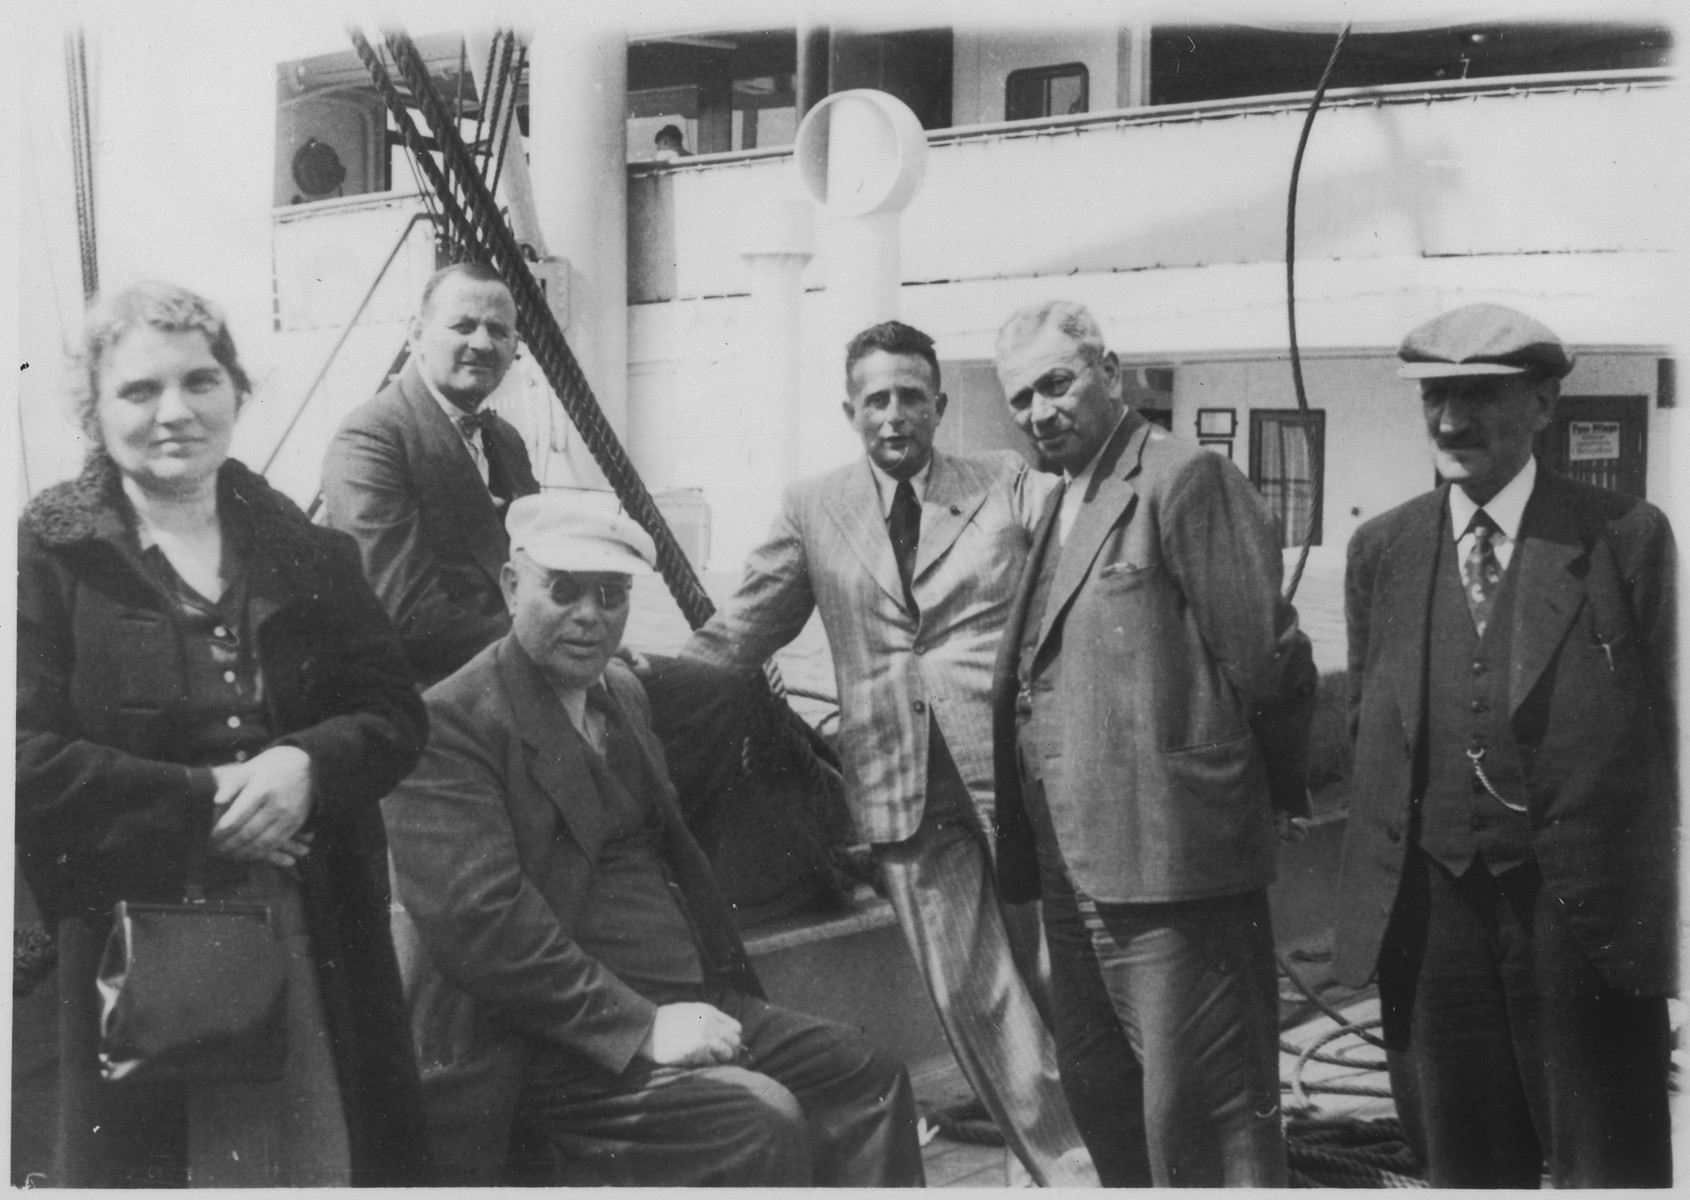 A group of pasengers gathers on the deck of the St. Louis.